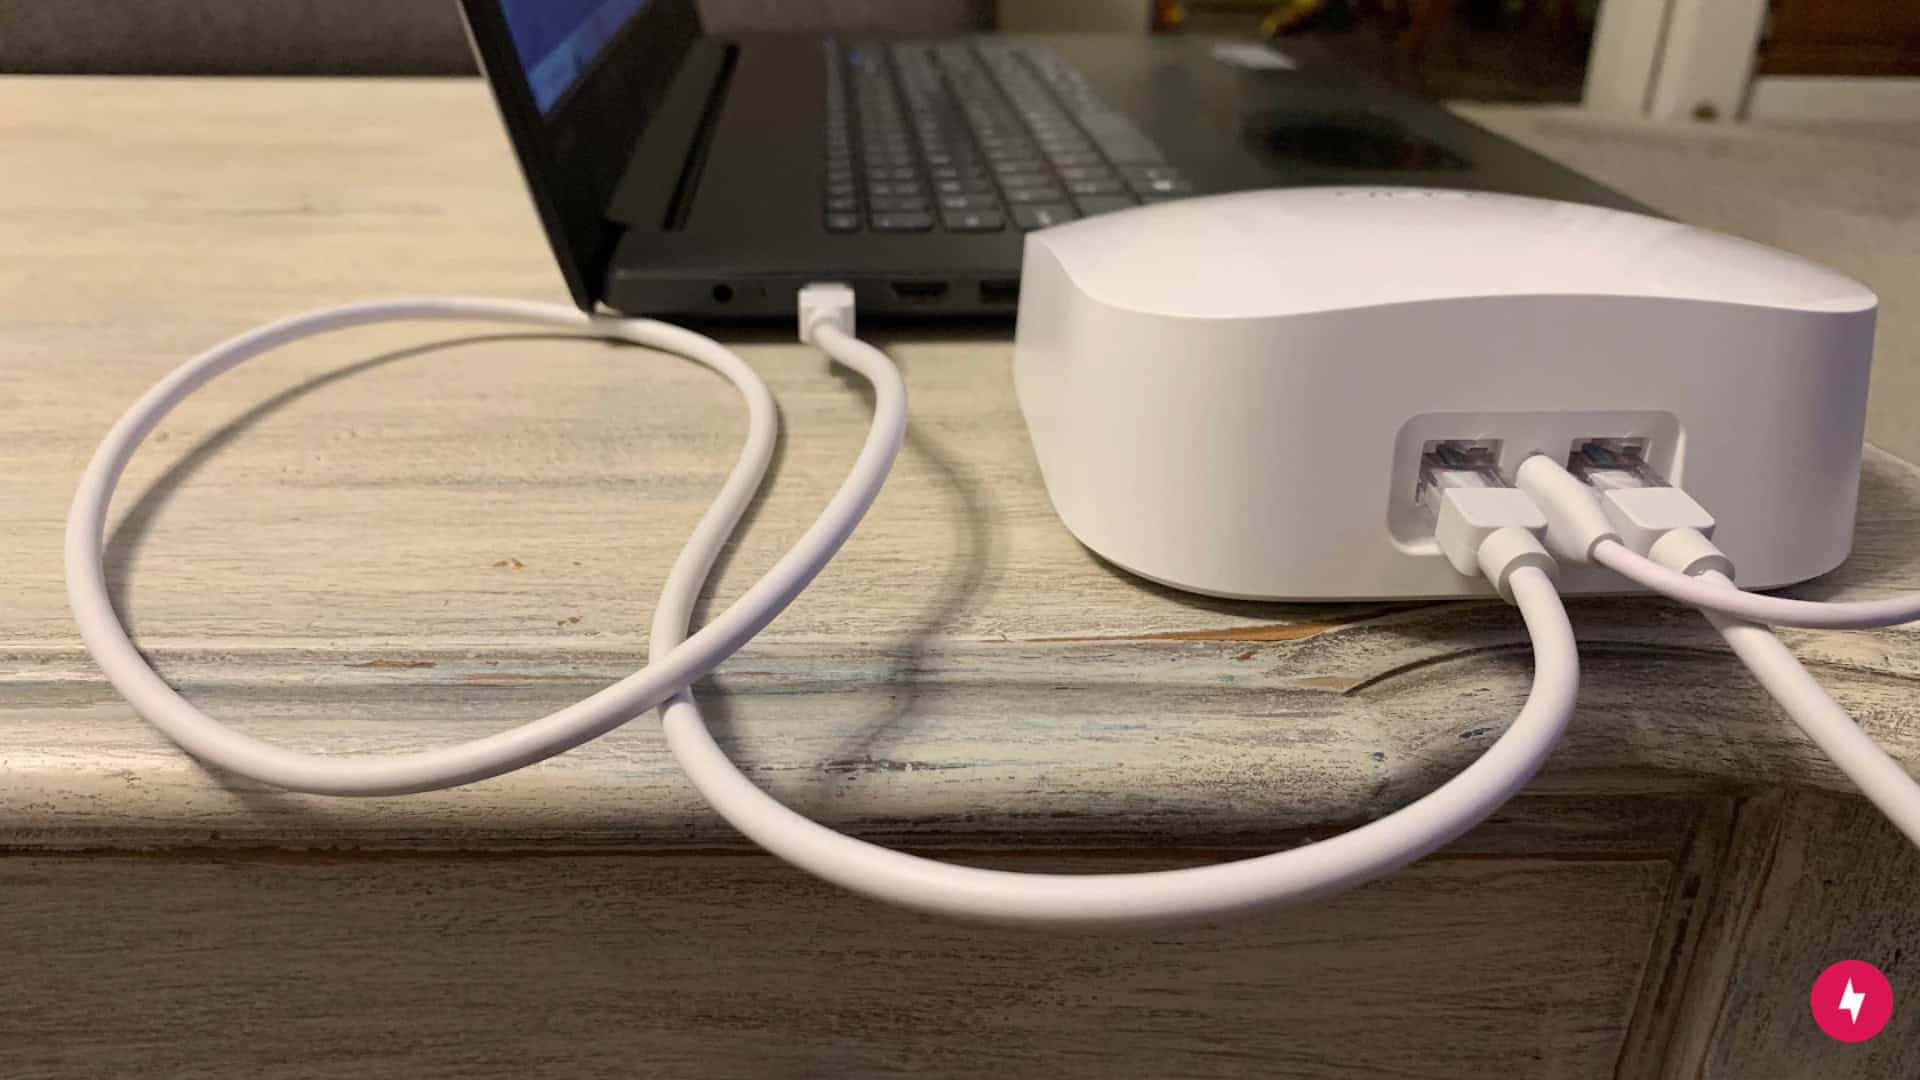 A white Ethernet cord connected to a black Windows laptop and a white Eero router.